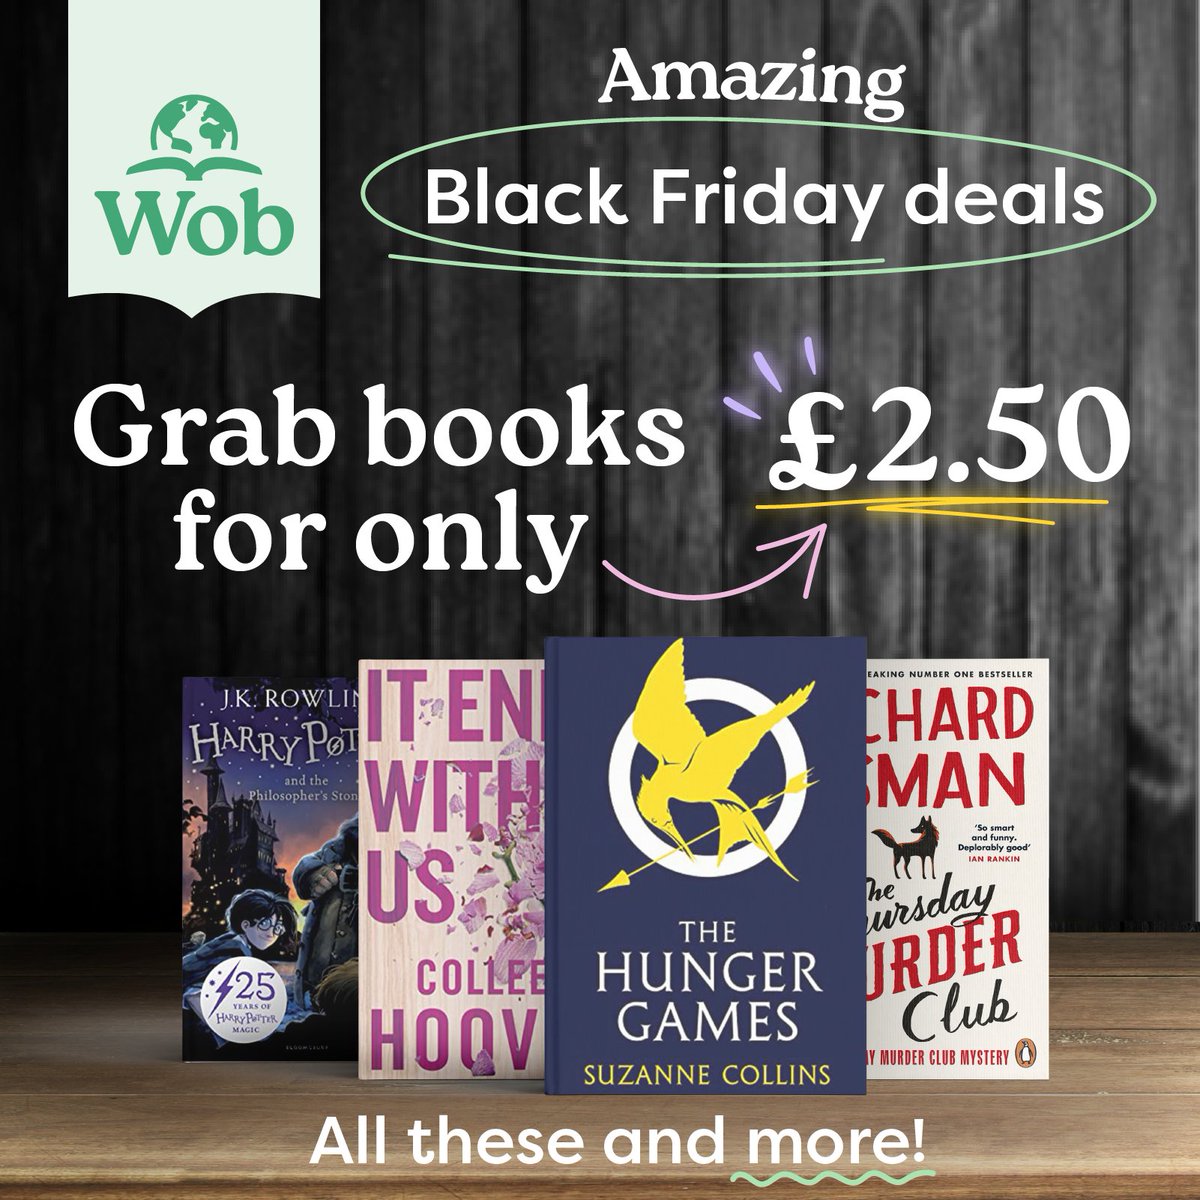 Grab some sustainable goodies and have an eco-friendly #BookFriday 📚🖤 Find books for £2.50 PLUS thousands of great titles in our Buy 3, Get Another Free offer on preloved books. Hurry though... when they're gone, they're gone! 🏃 wob.com/en-gb/featured… #blackfriday